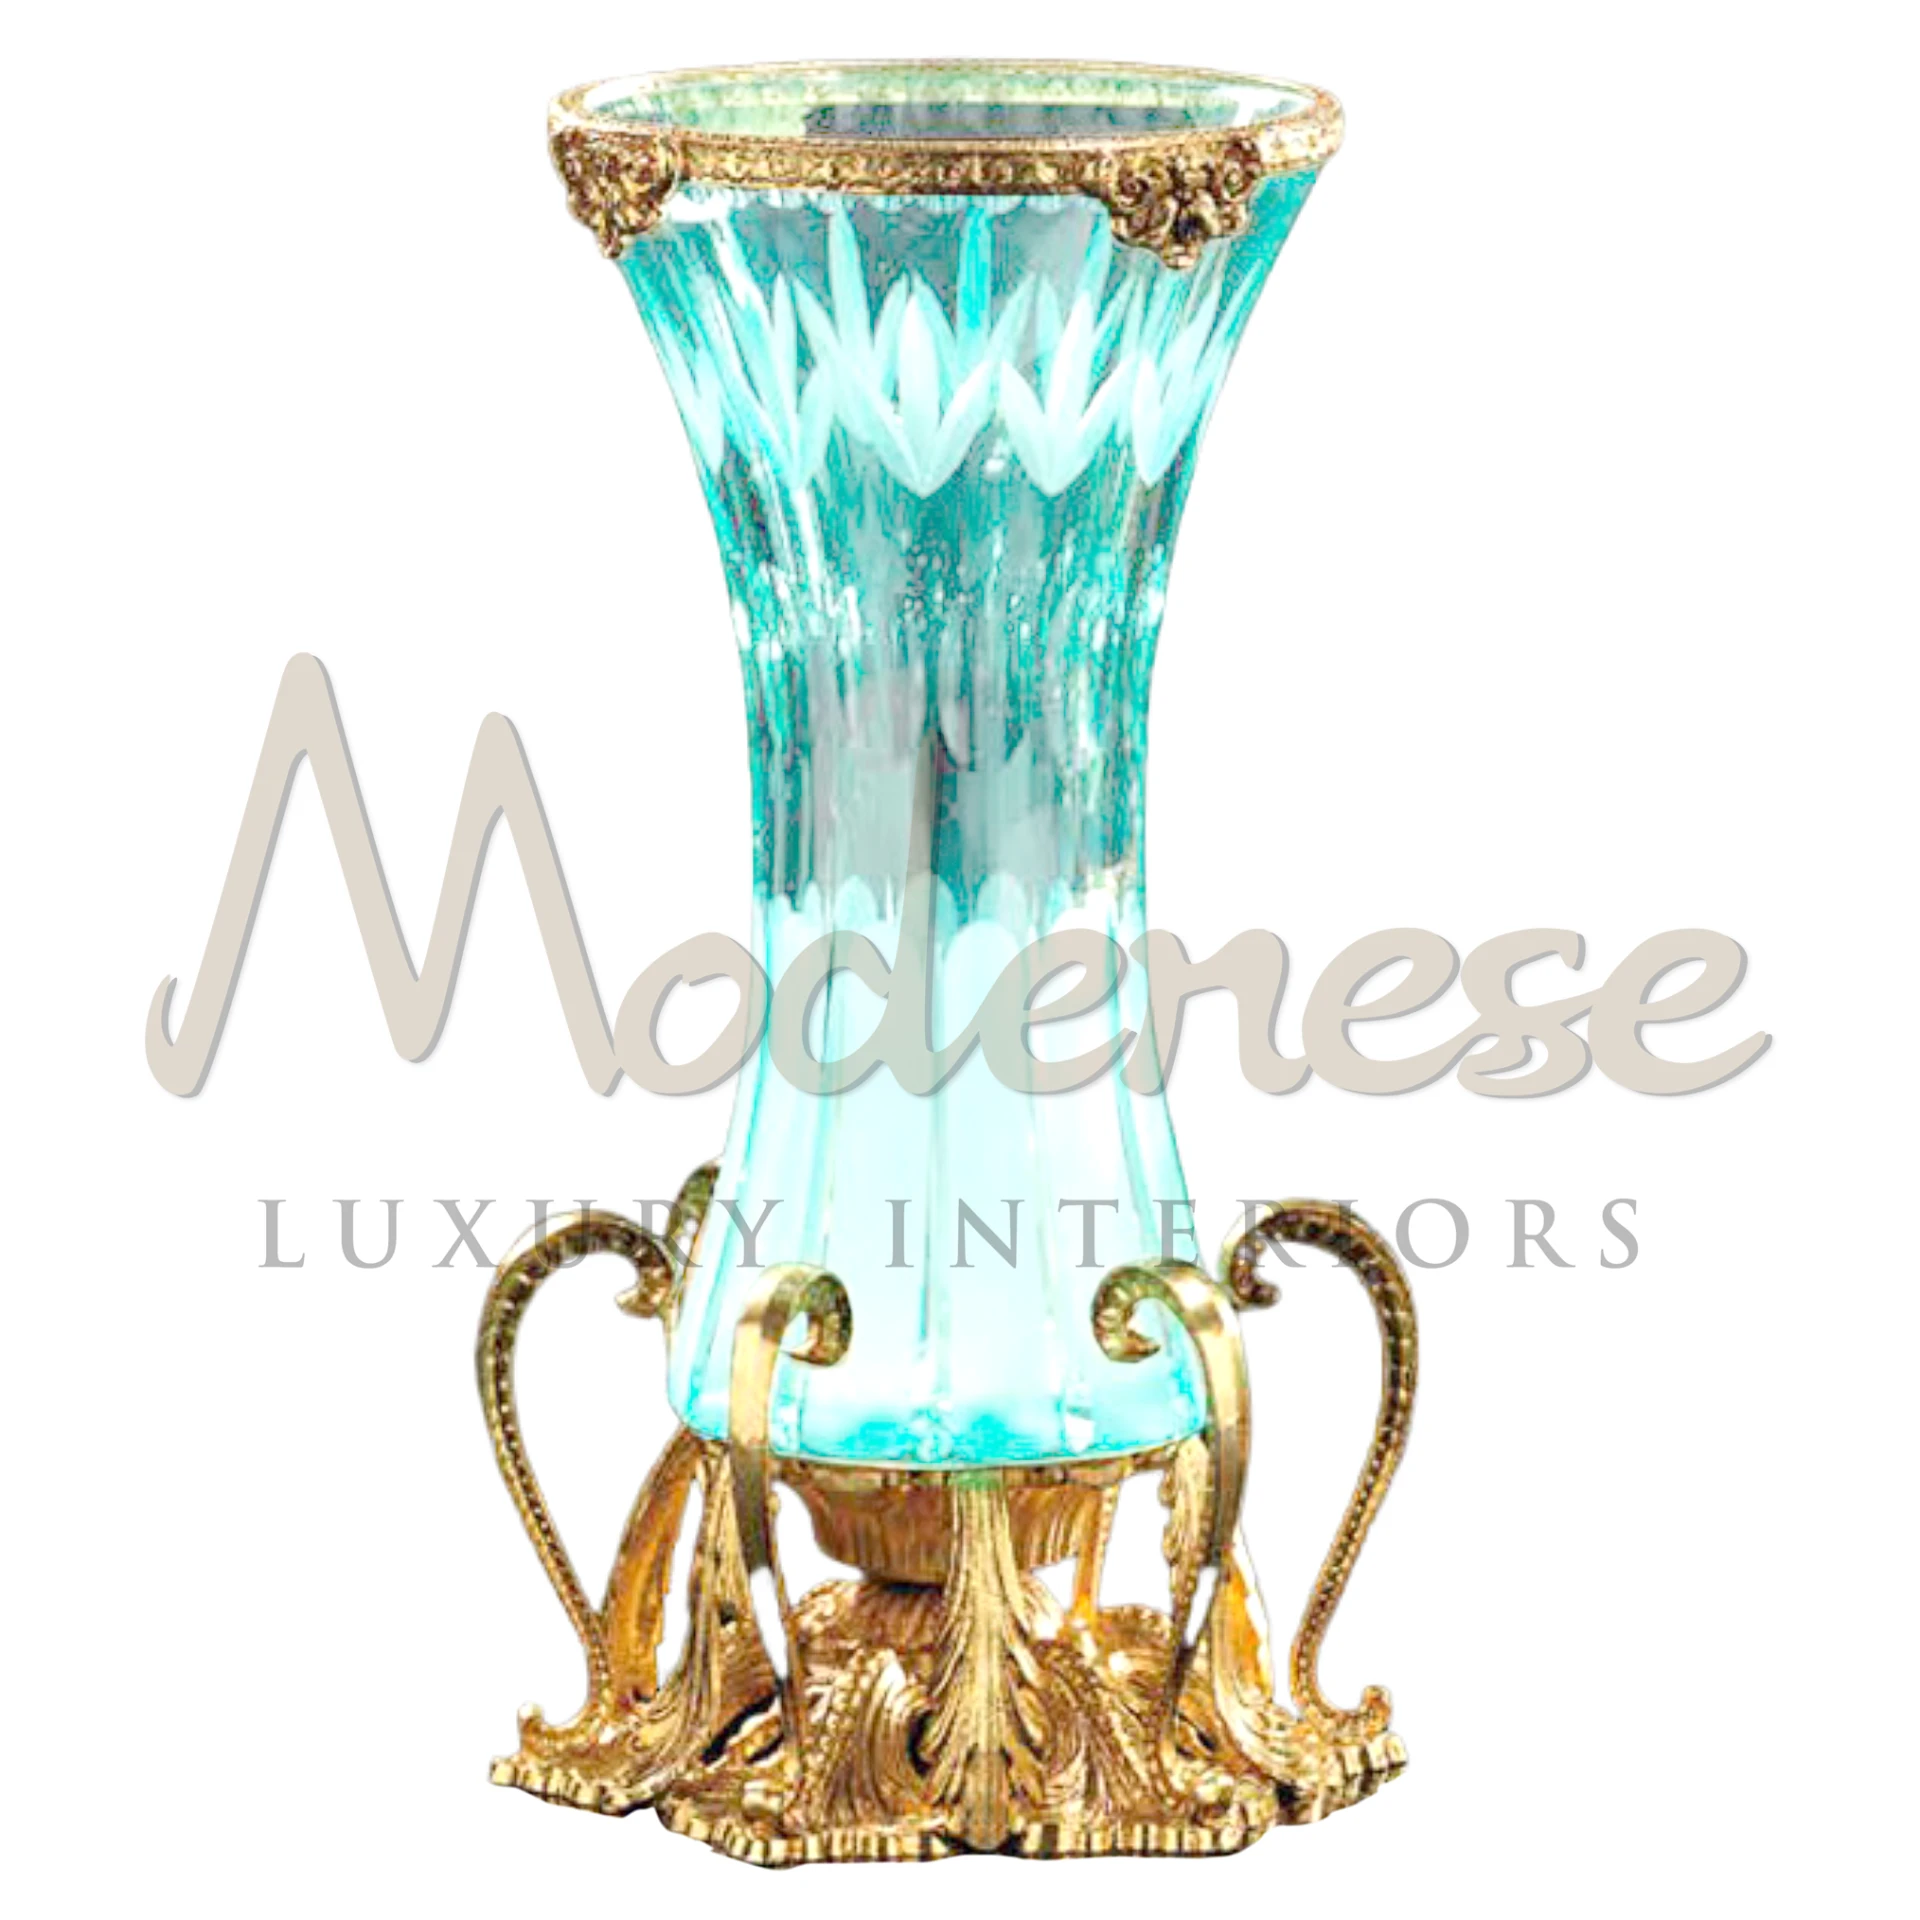 Royal Tall Turquoise Vase, a luxurious and elegant piece for sophisticated interior design, blending classic and baroque styles in fine porcelain or glass.


